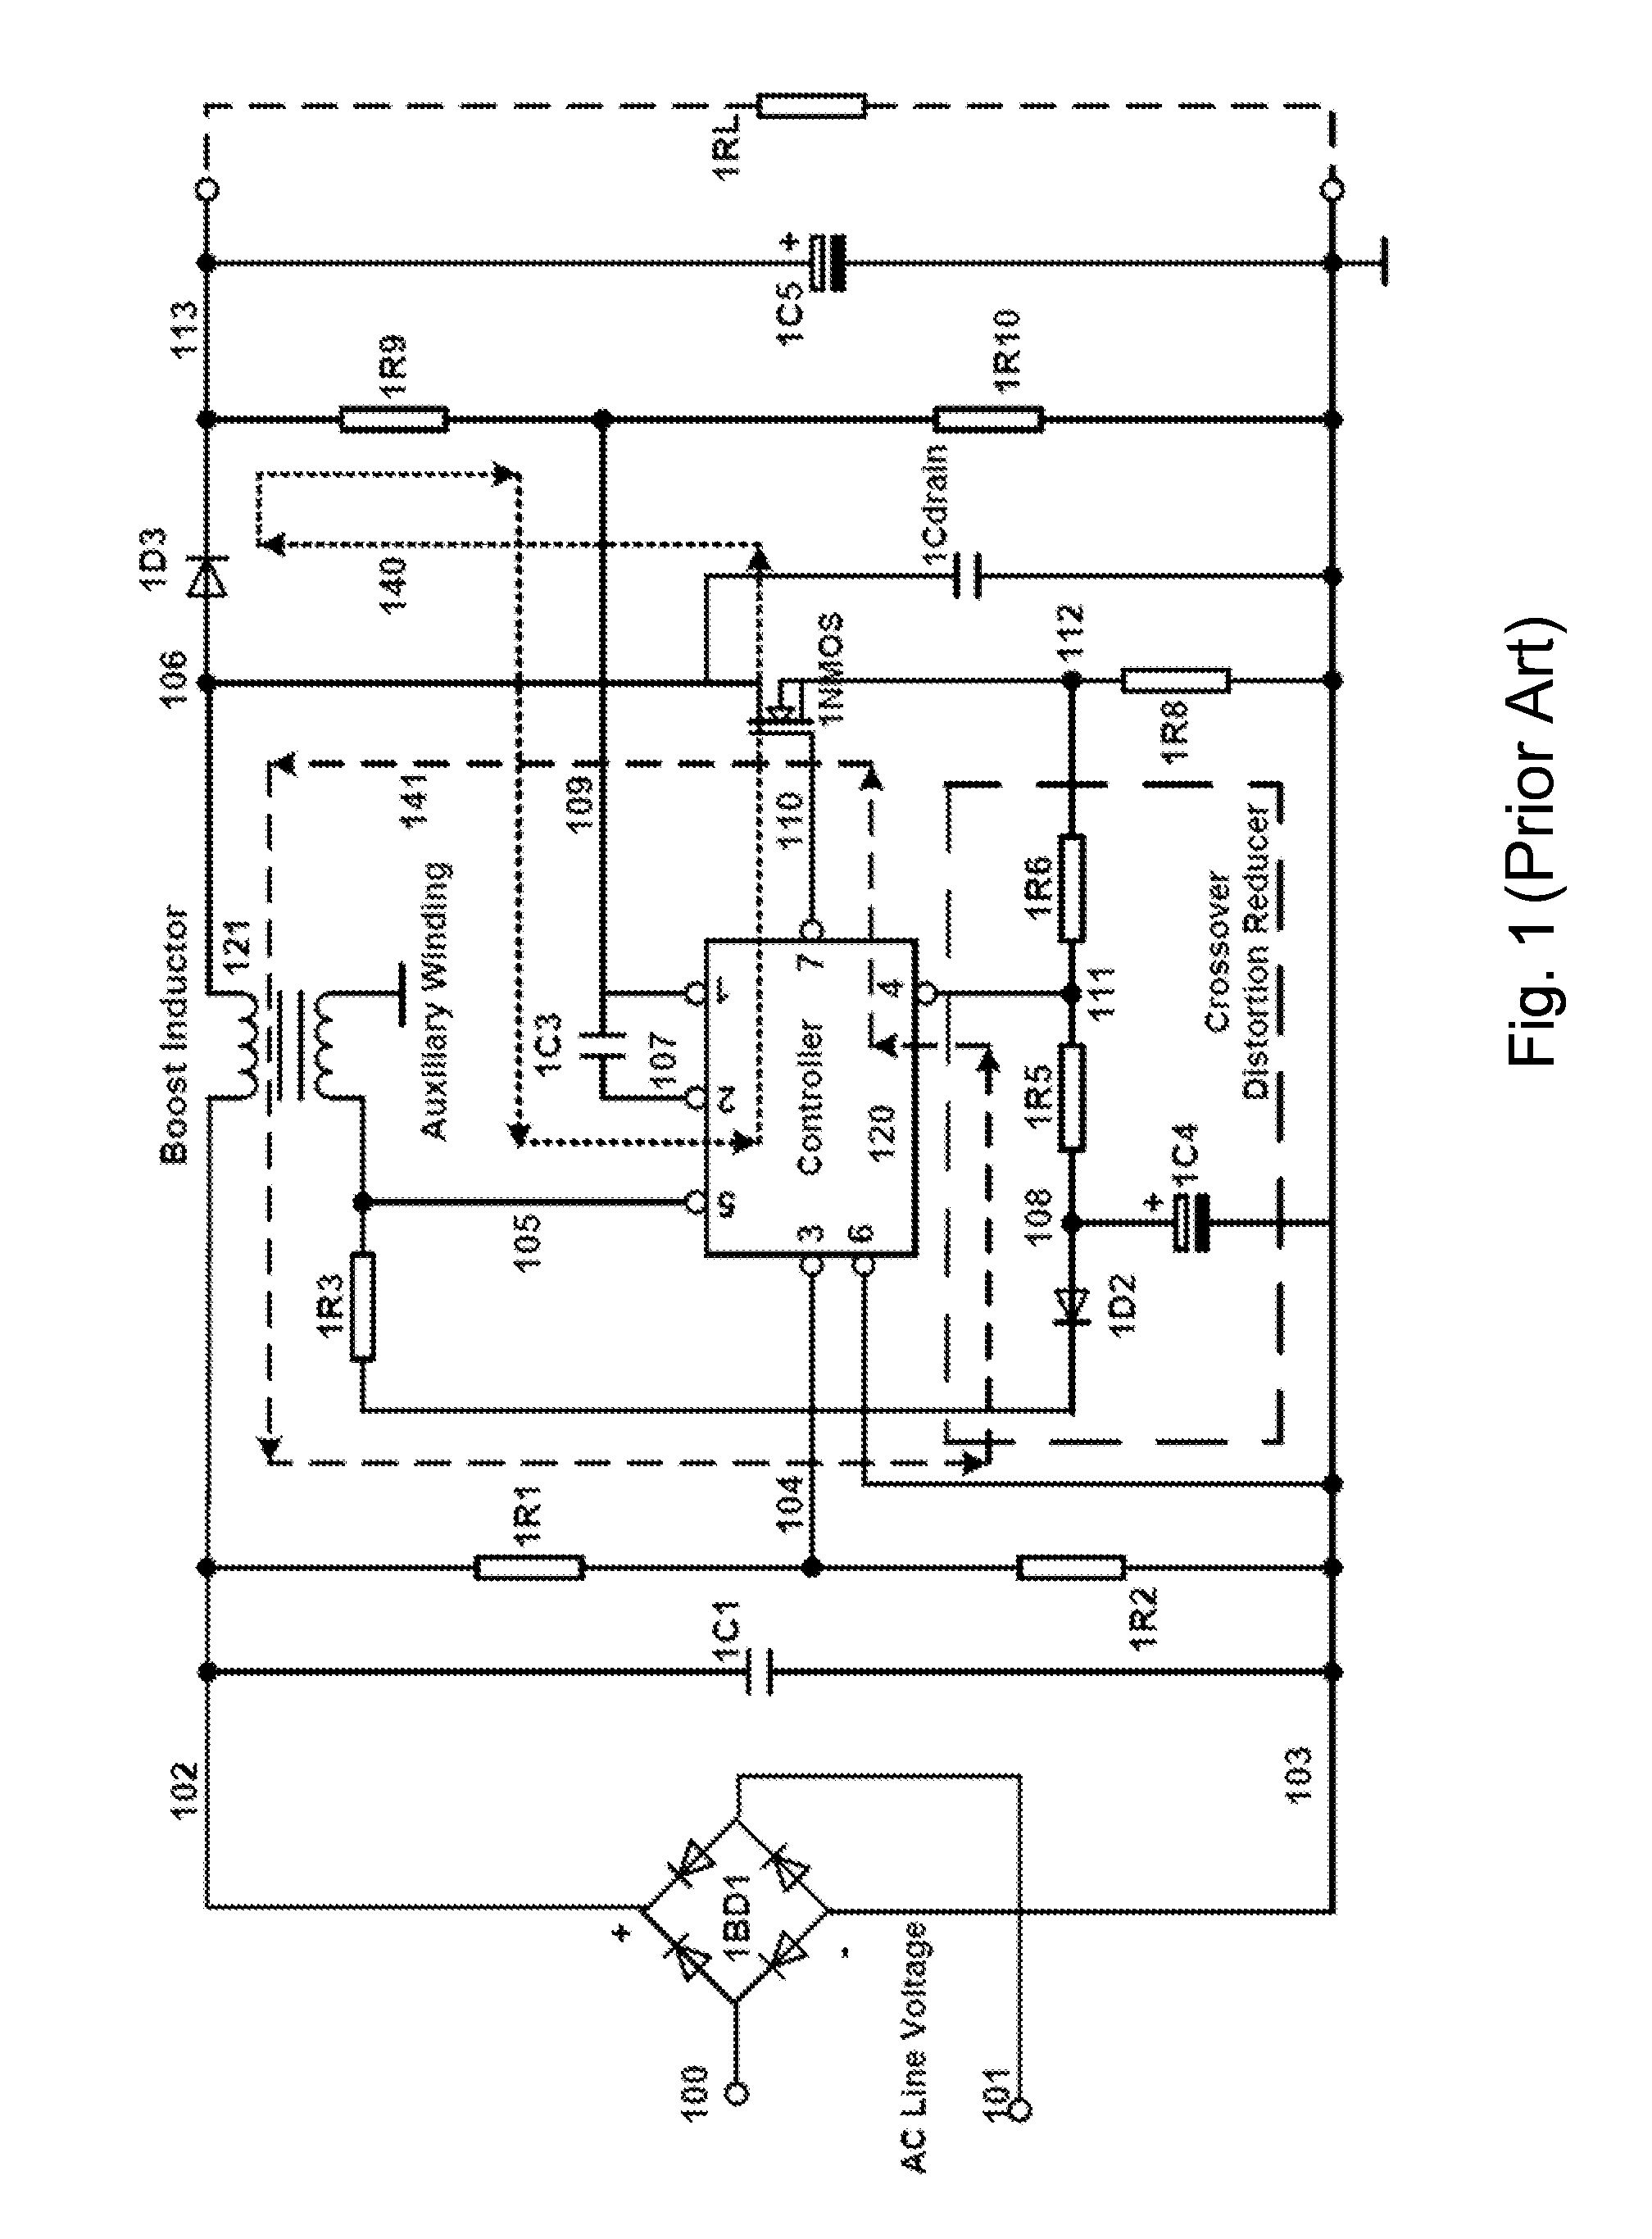 Transition mode power factor correction device with built-in automatic total harmonic distortion reduction feature